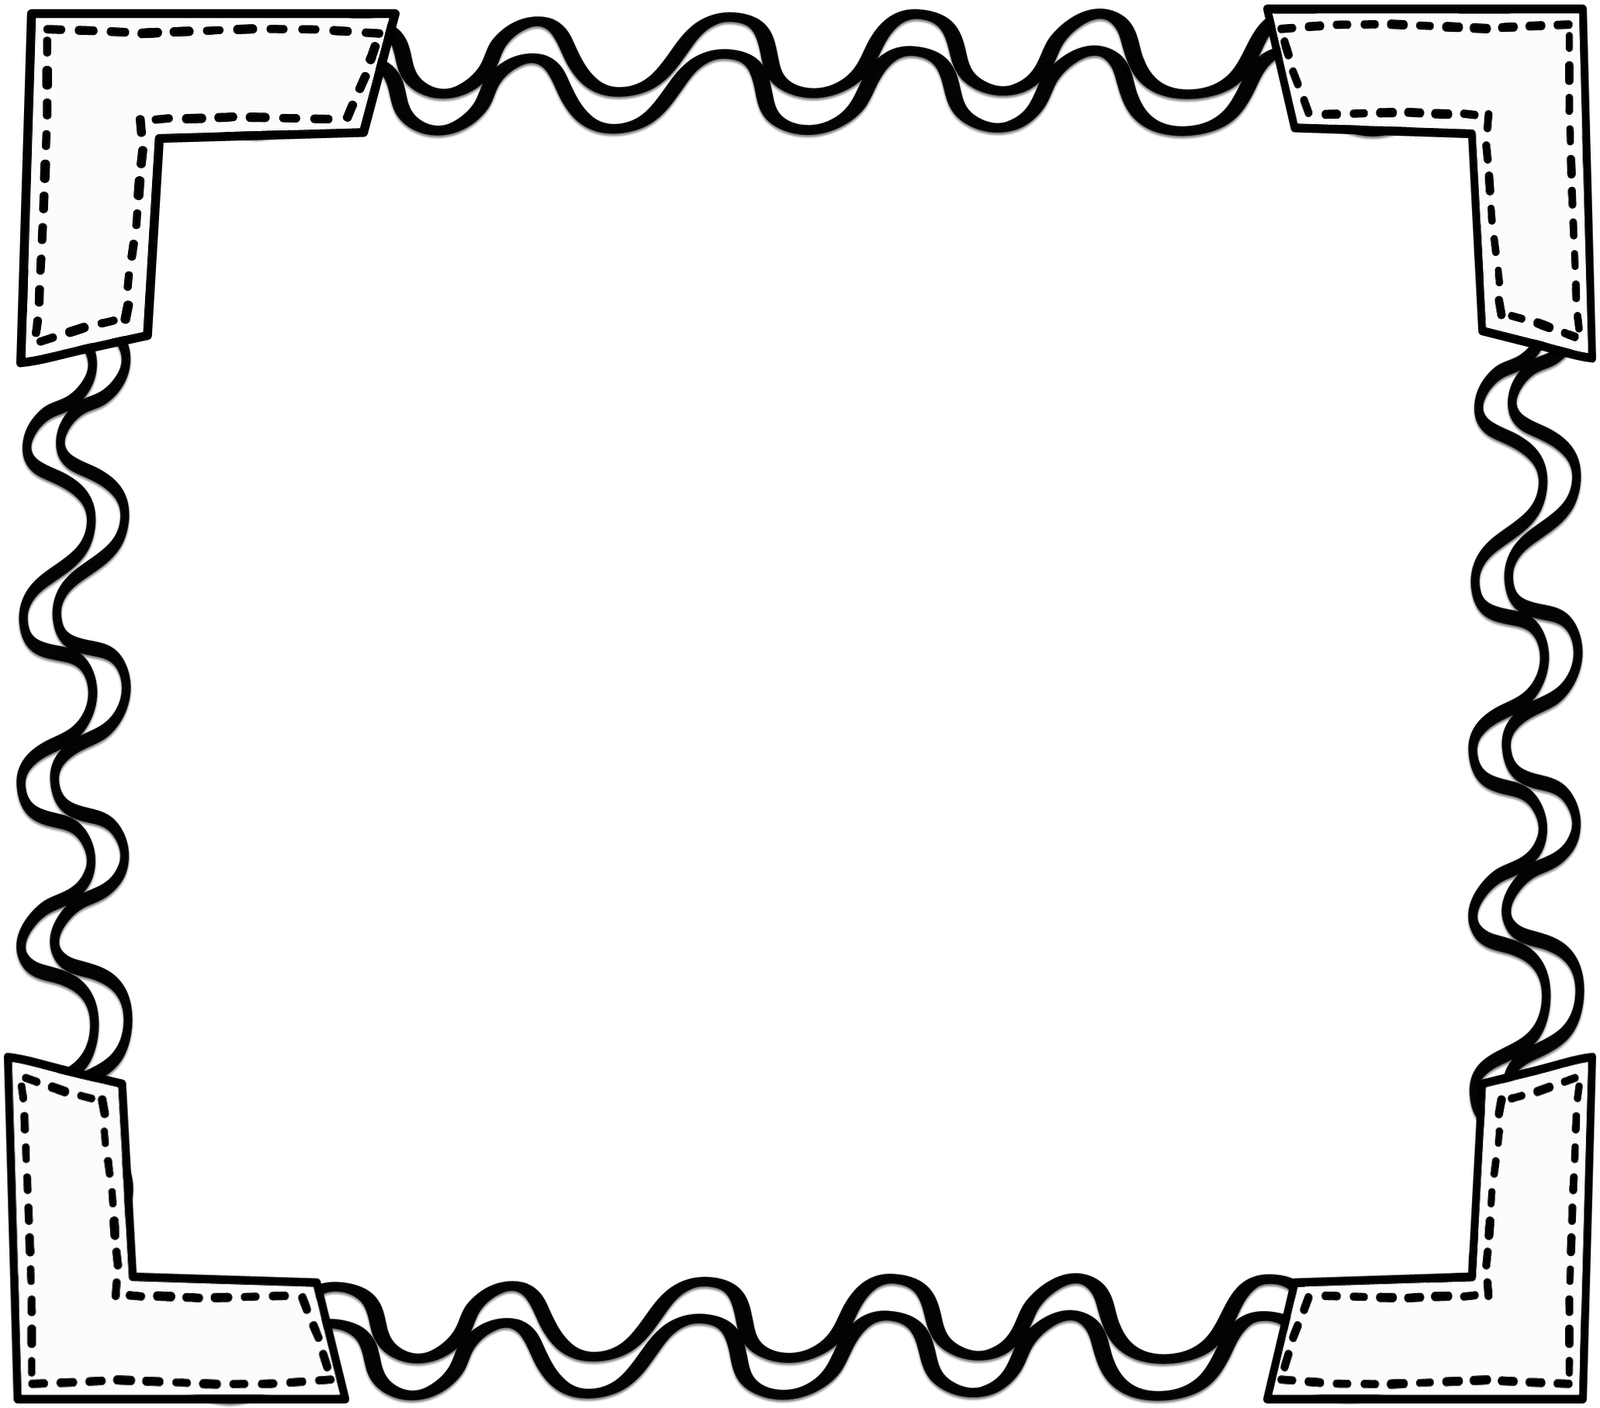 Border Clipart Black And White   Clipart Panda   Free Clipart Images